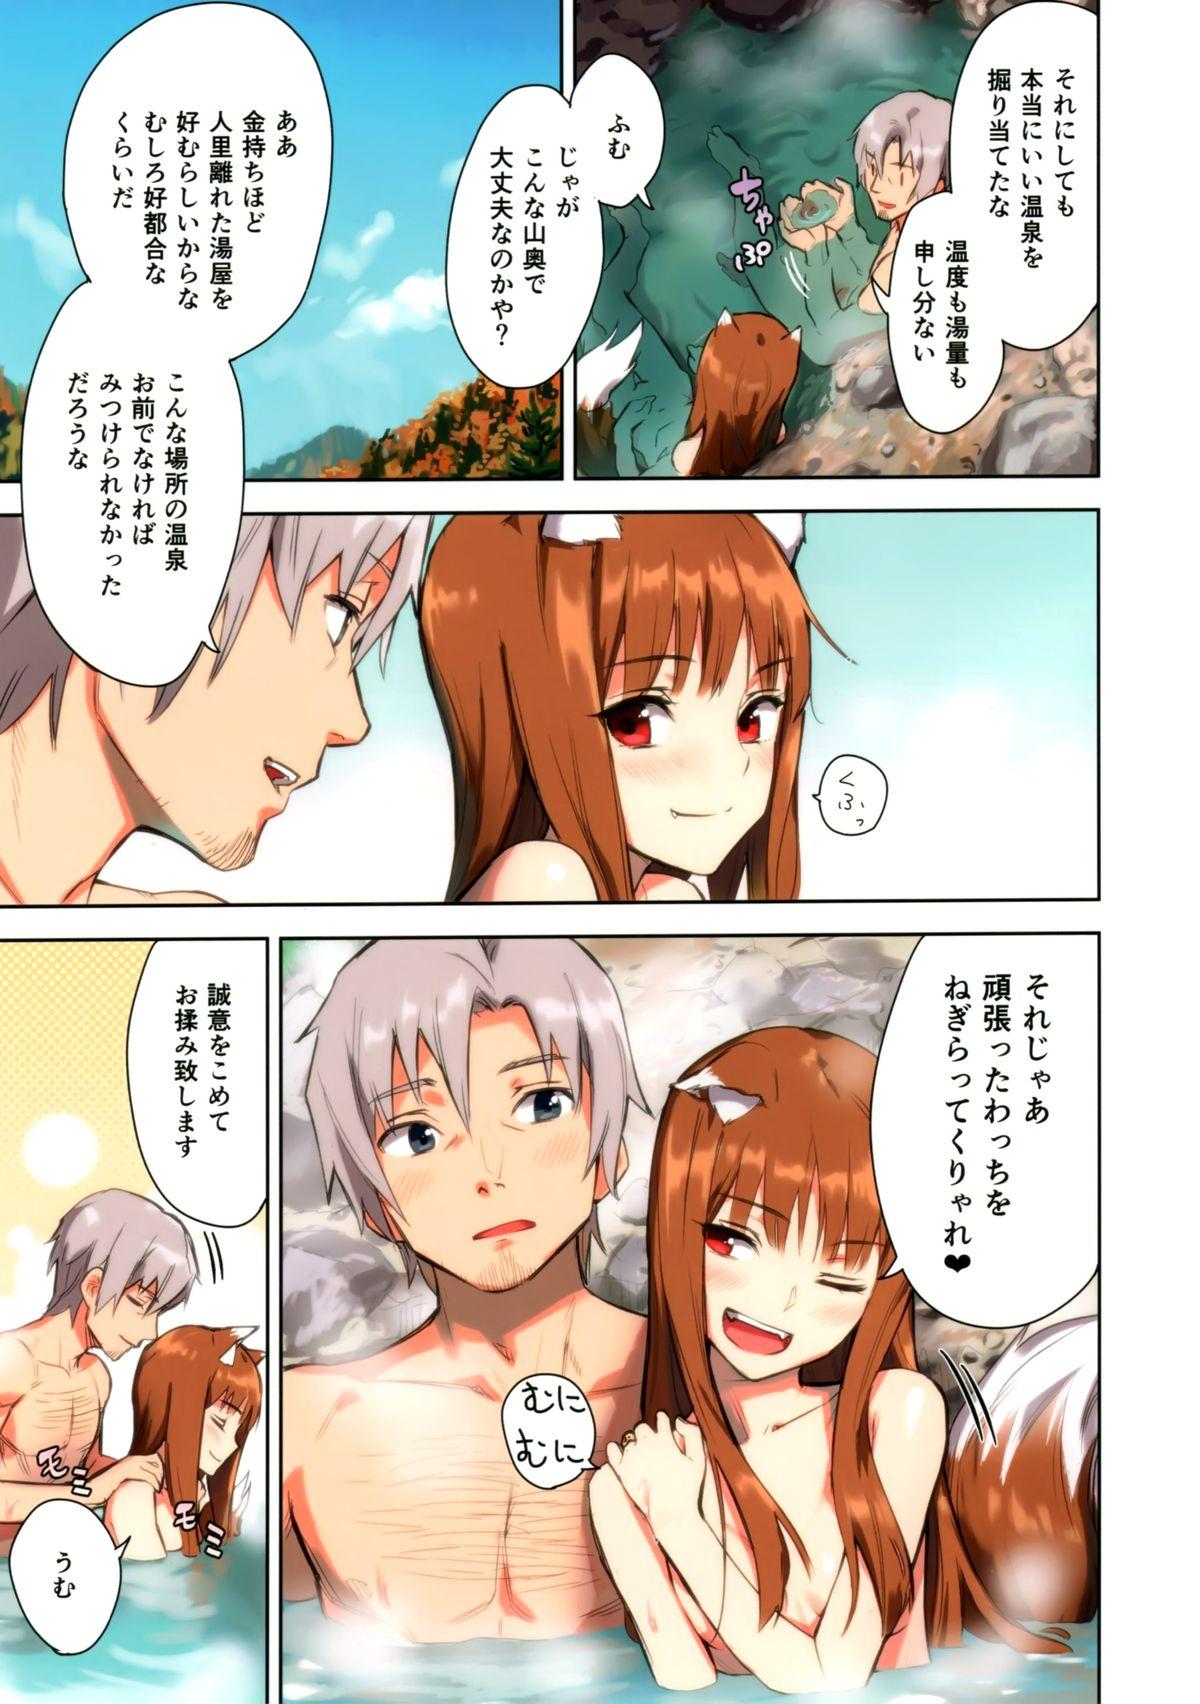 Homemade Wacchi to Nyohhira Bon FULL COLOR - Spice and wolf Branquinha - Page 7